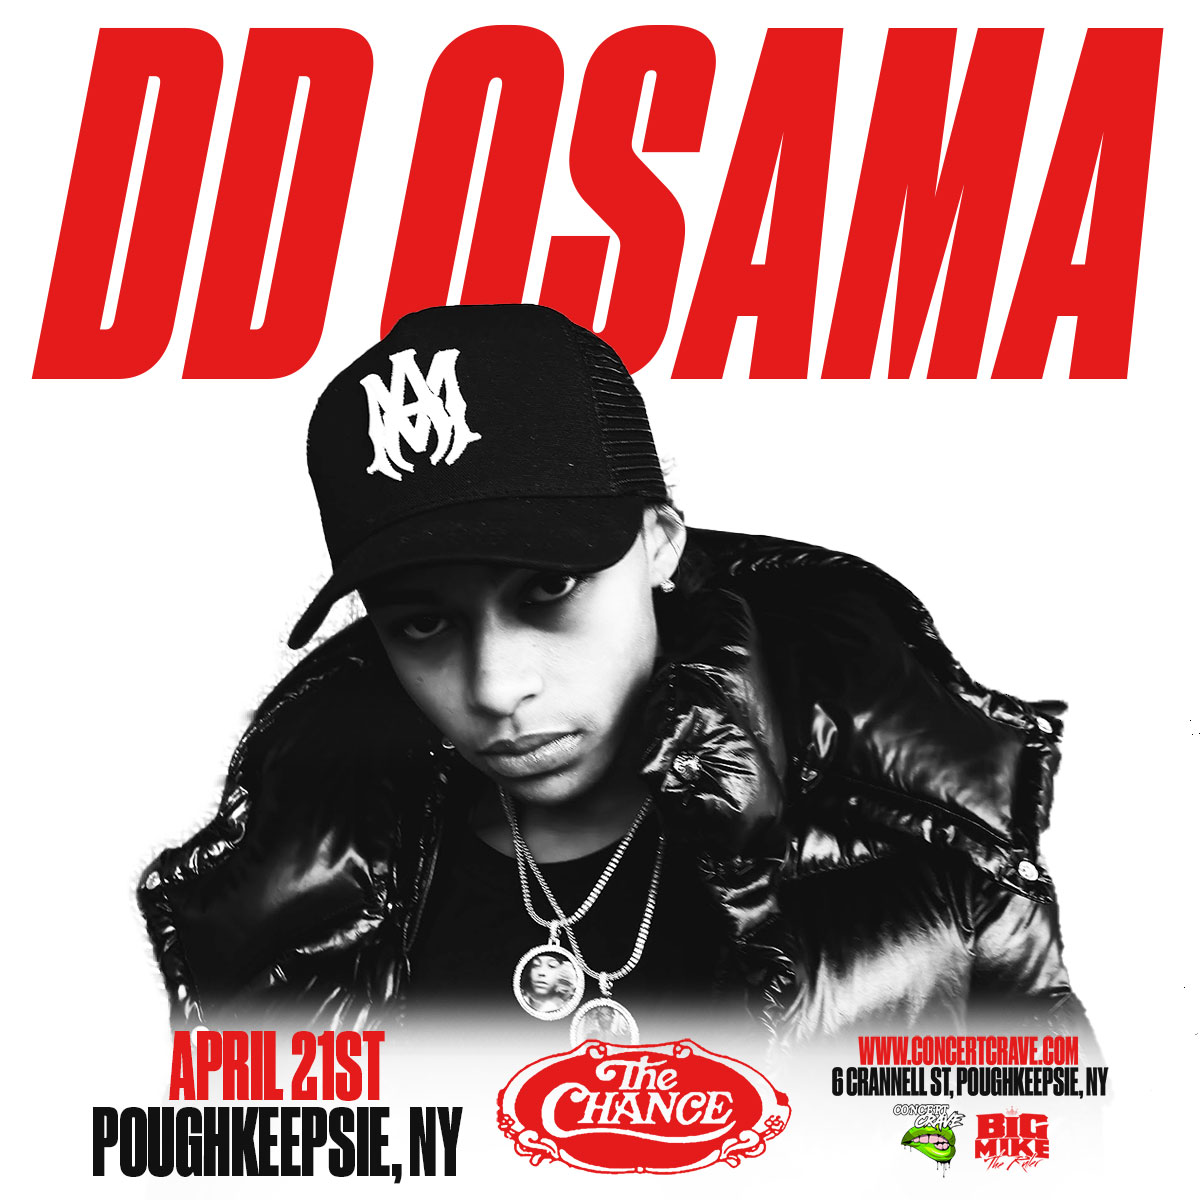 Buy Tickets to DD OSAMA Live In Concert! Poughkeepsie, NY in